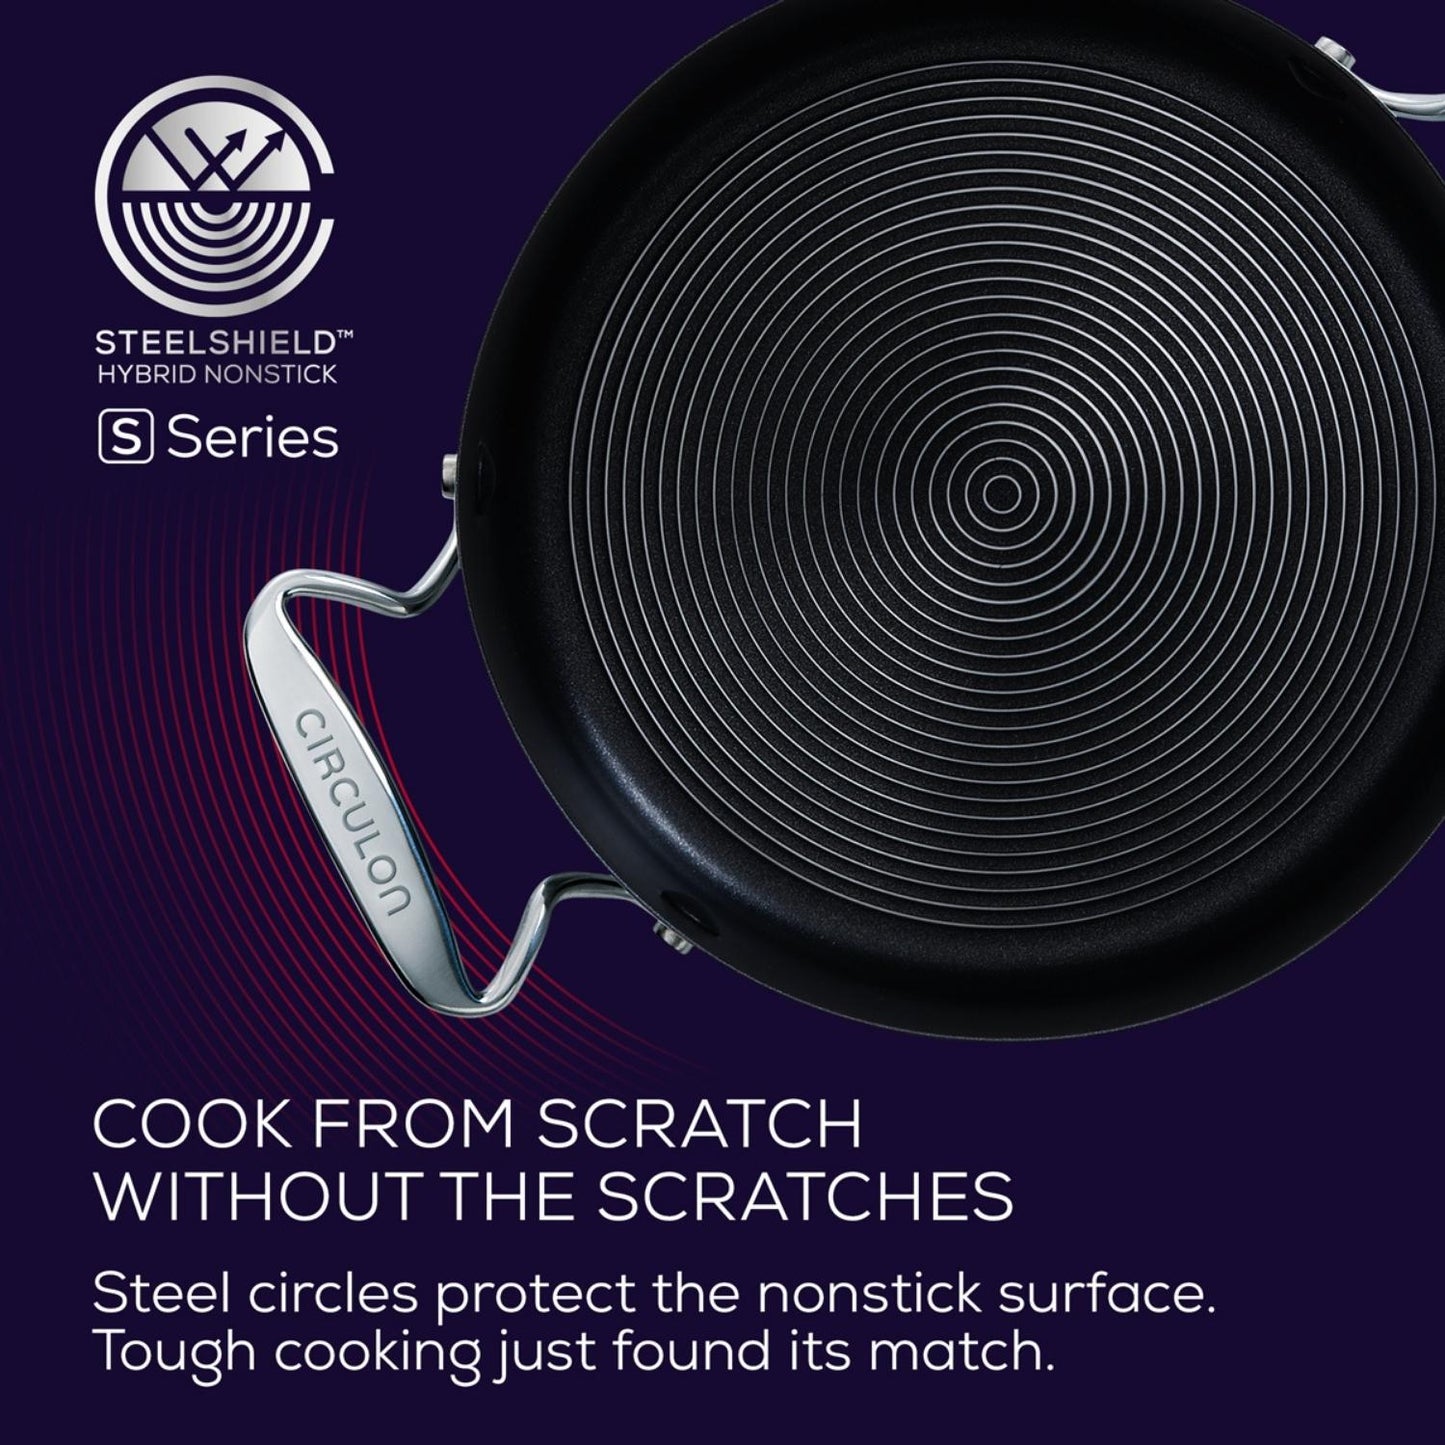 Circulon S-Series Nonstick Stainless Steel Induction Covered Saucepot 22cm/3.8L